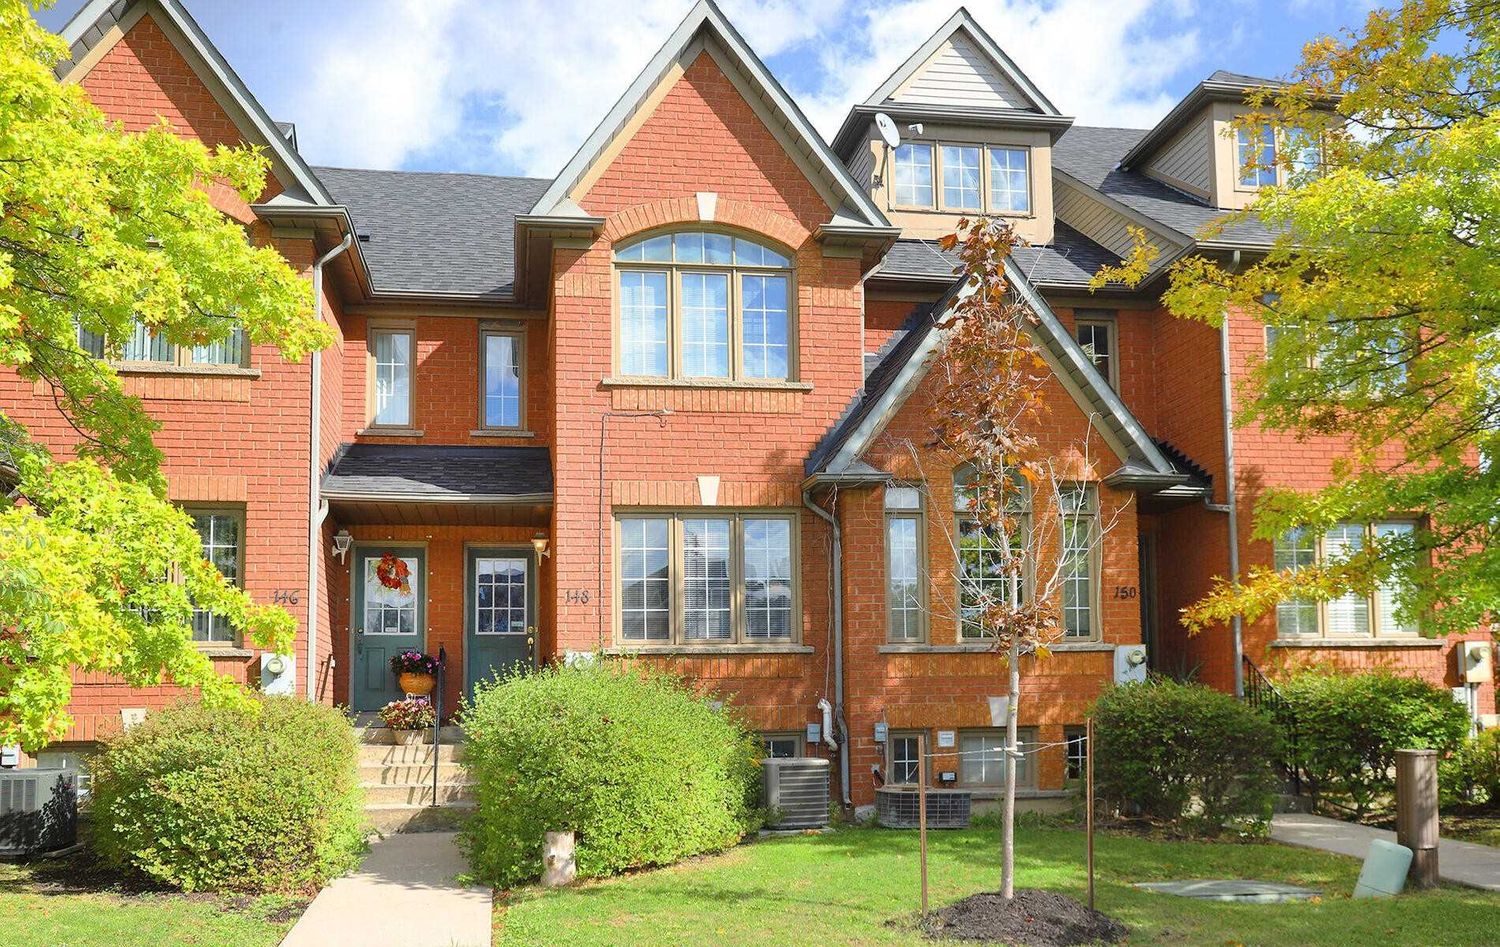 102-220 Rory Road. 102-220 Rory Road Townhomes is located in  North York, Toronto - image #1 of 2